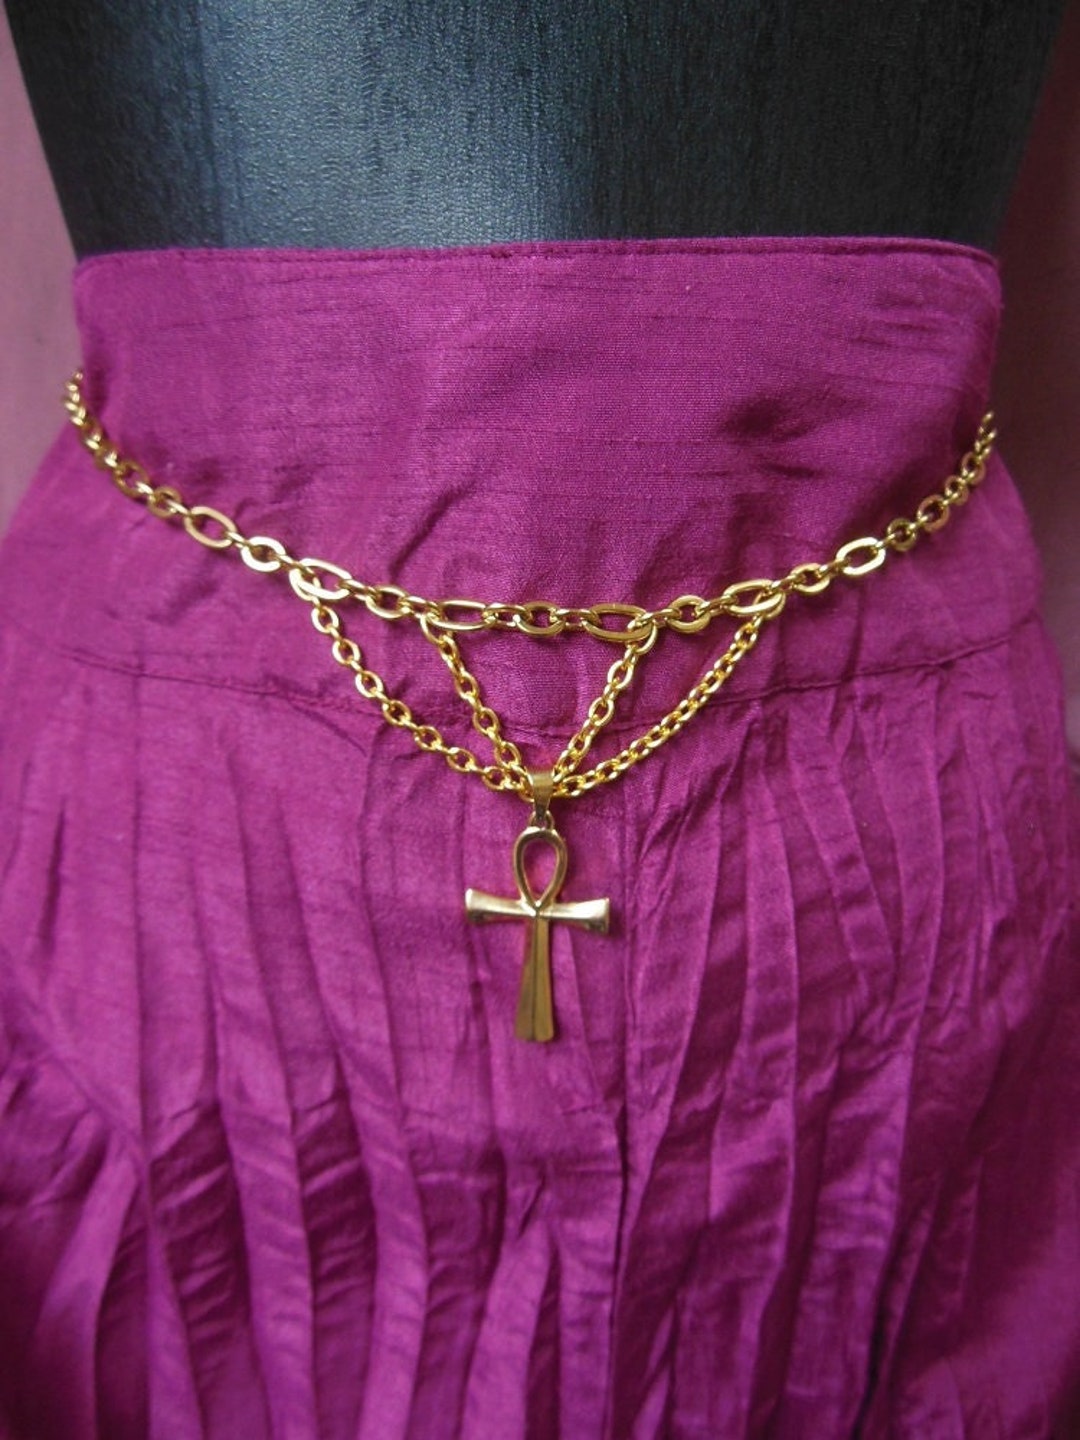 Egyptian Coin Belt with Crescent Pendants and Chain Drapes - GOLD